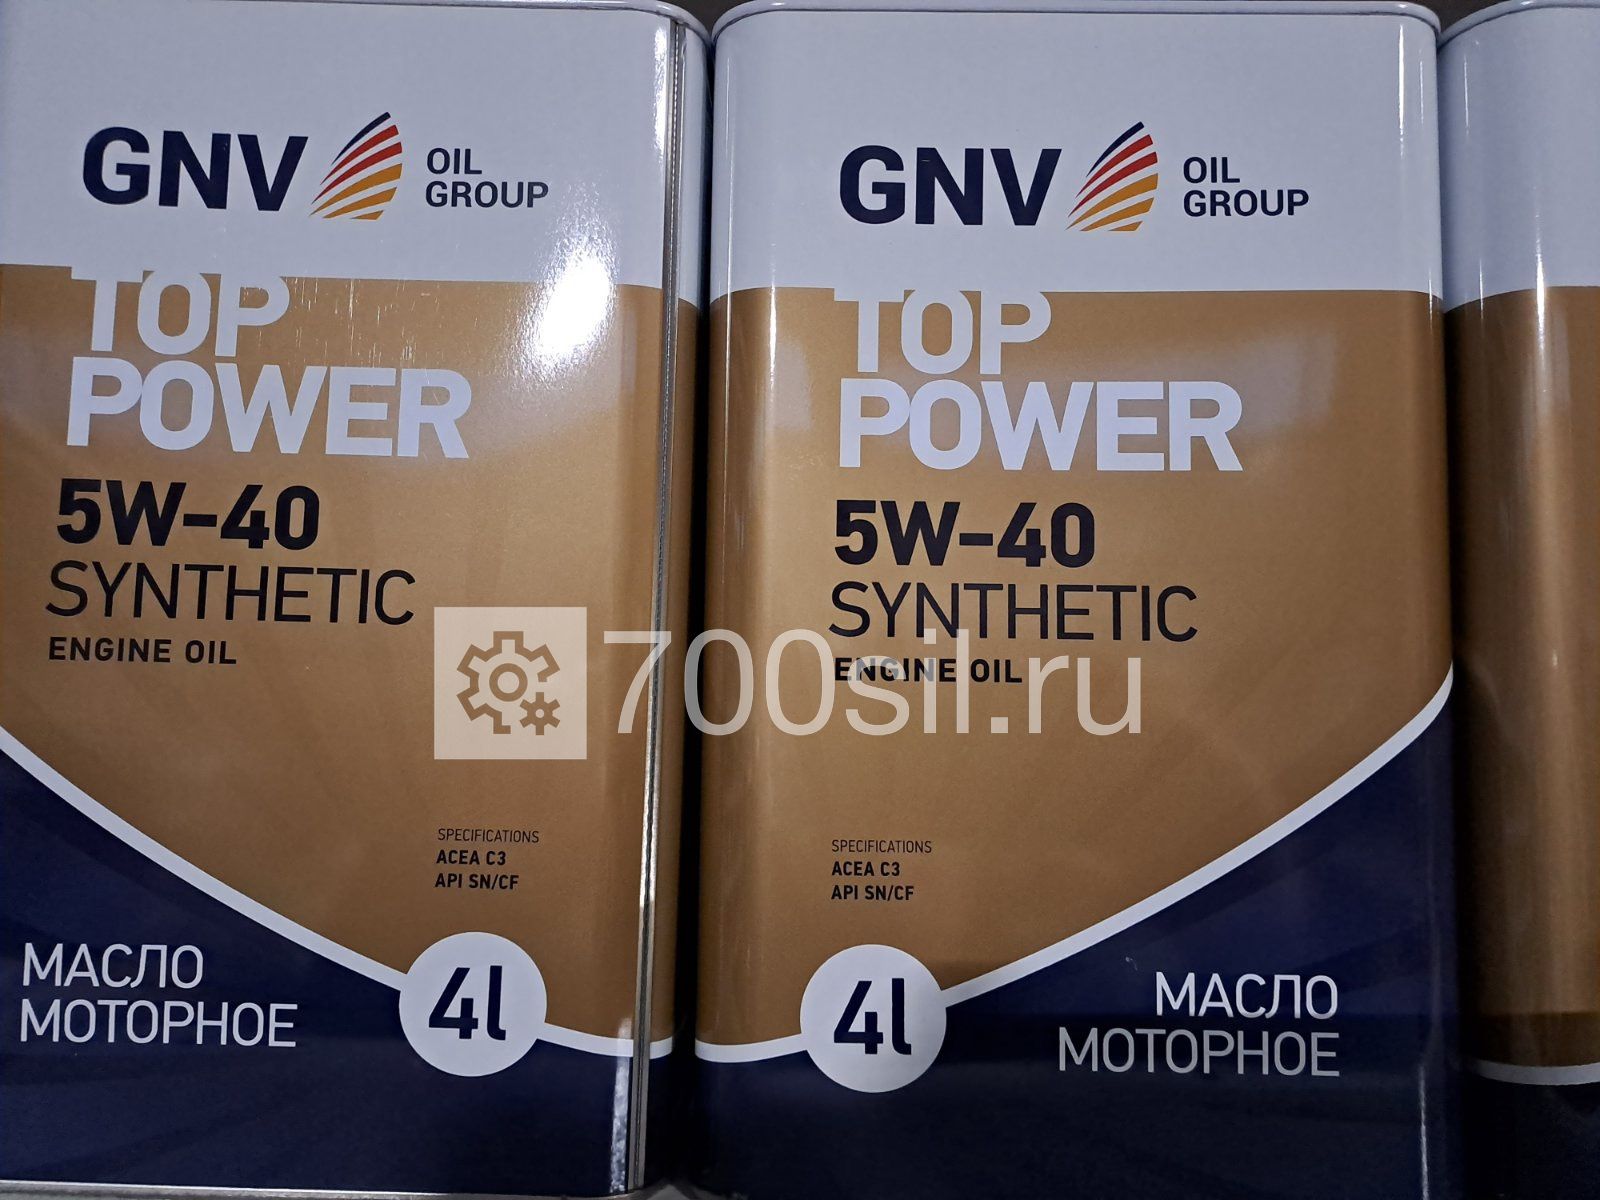 Масло моторное GNV Top Power 5W40 Synthetic ACEA C3, MB 229.51/229.52 (4л)